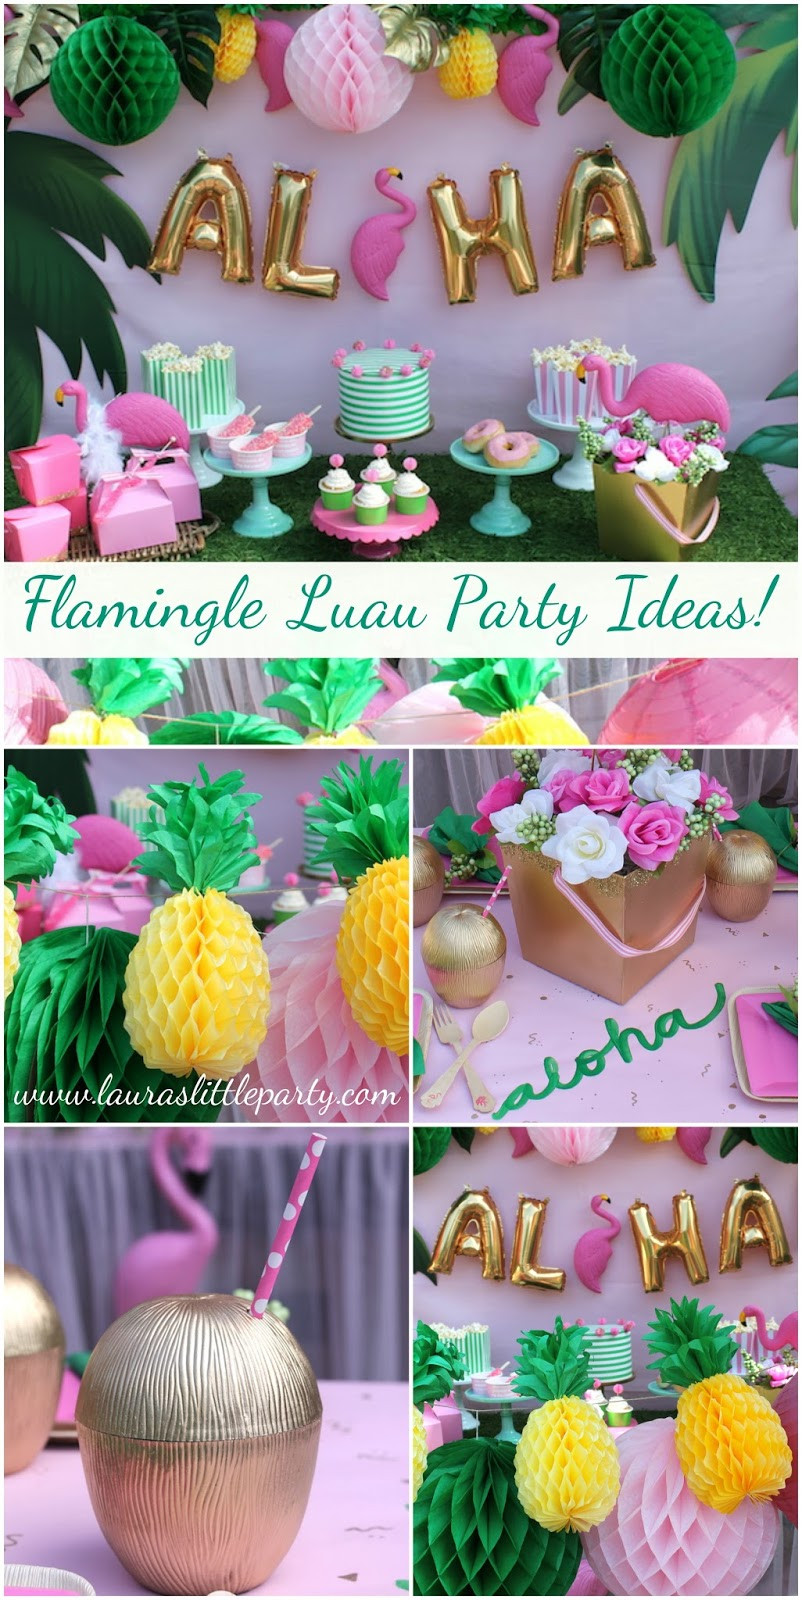 Summer Themed Birthday Party Ideas
 Let s Flamingle Luau Summer Party Ideas LAURA S little